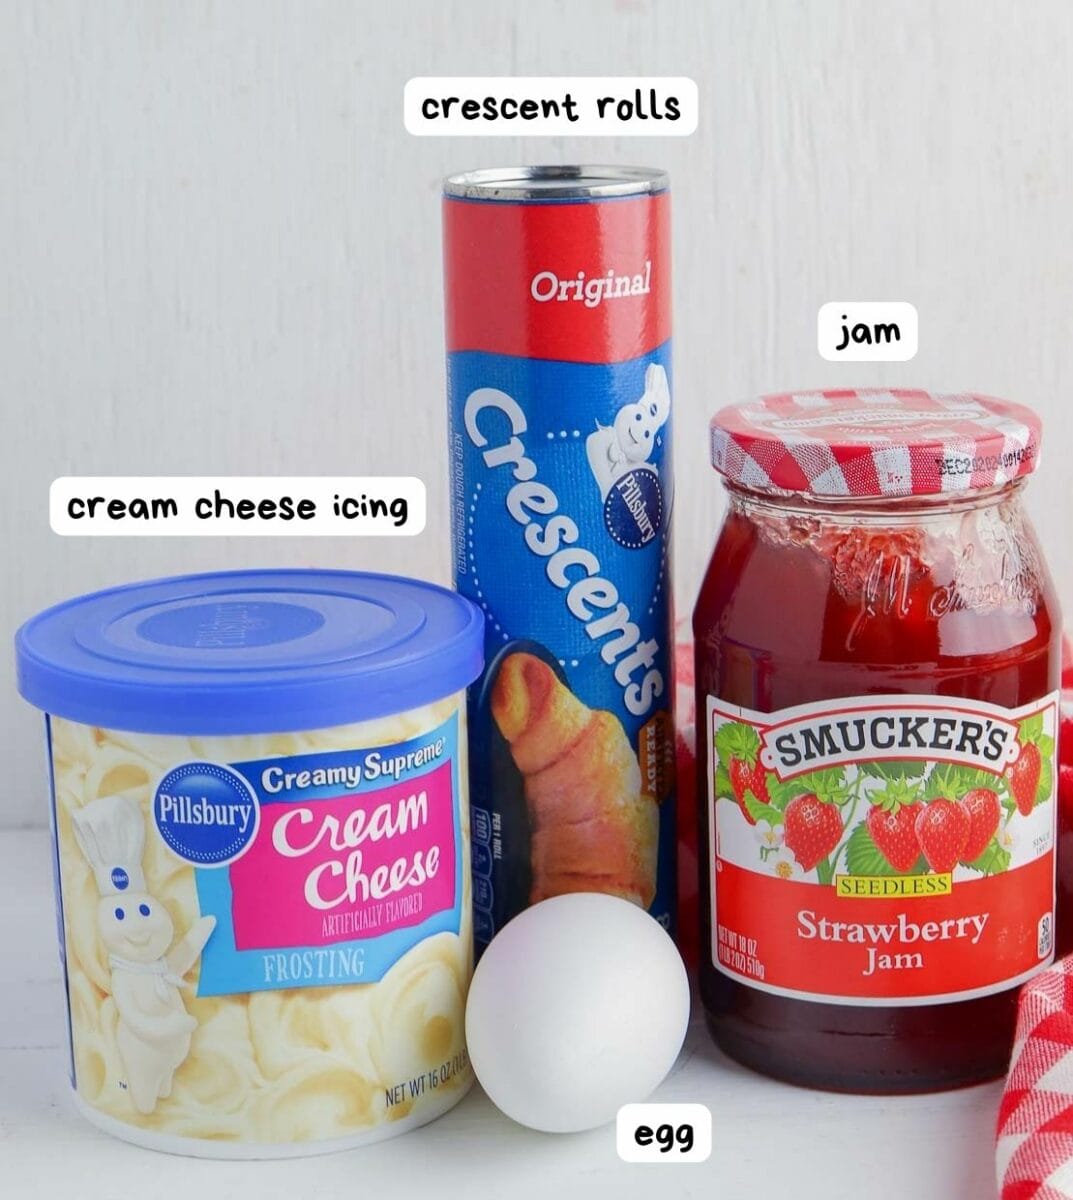 jam crescent roll ingredients in a labeled photo.